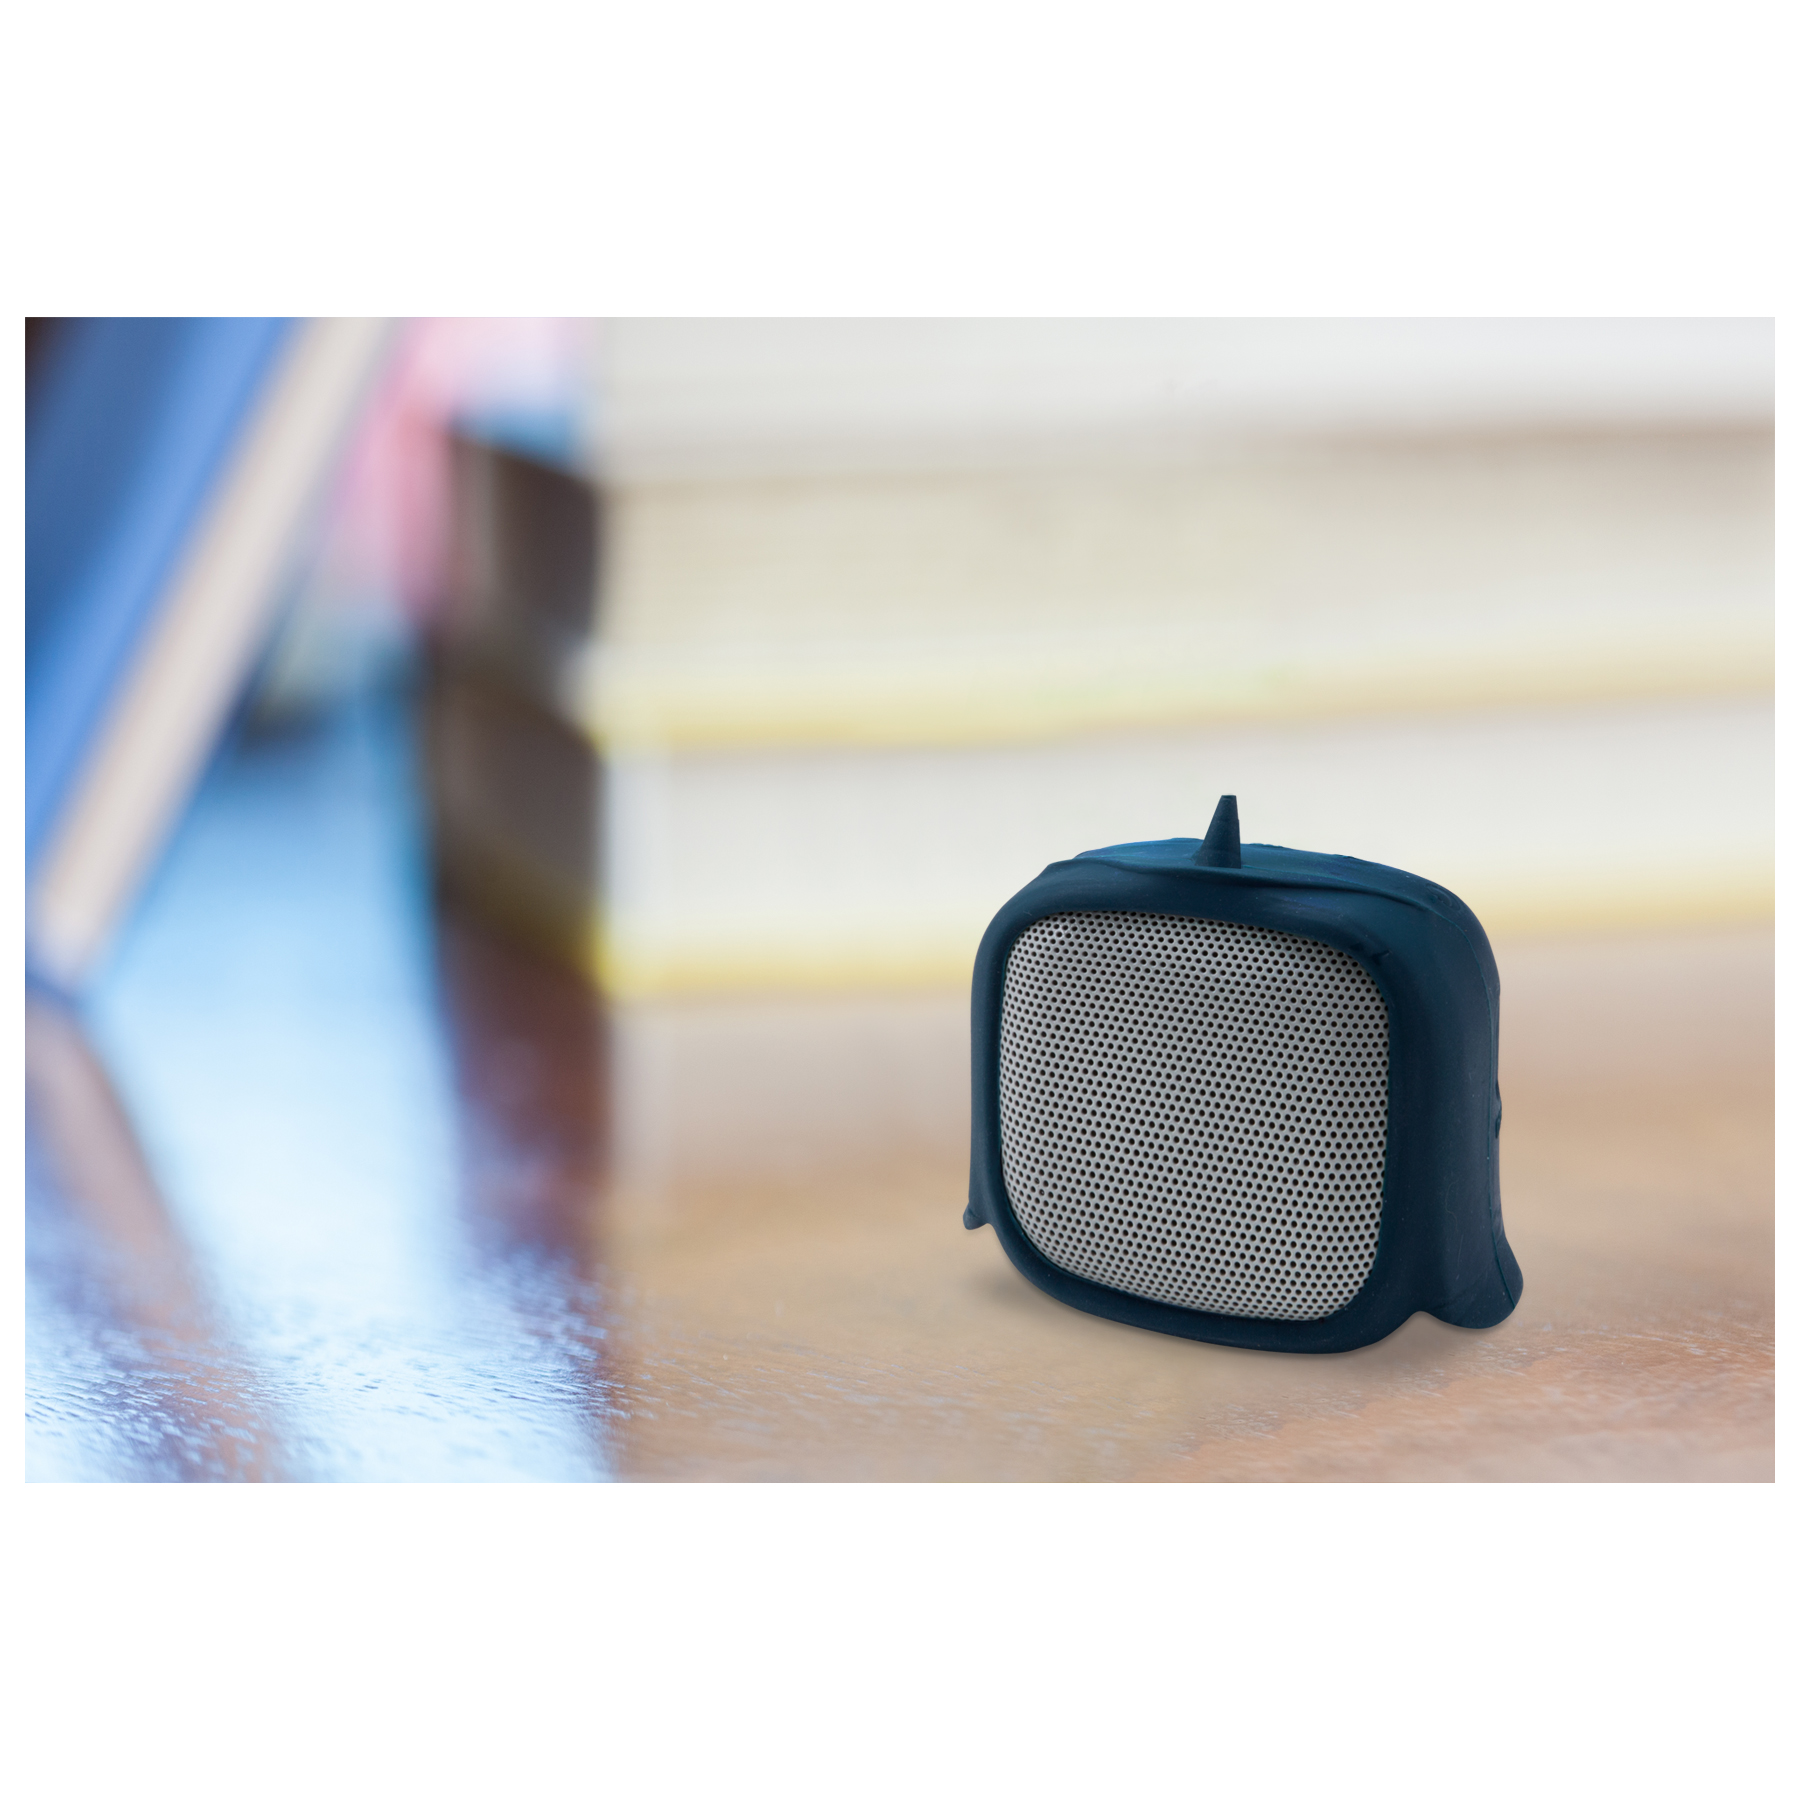 iLive Wild Tailz Wireless Narwhal Speaker, ISB19NAR - image 4 of 4